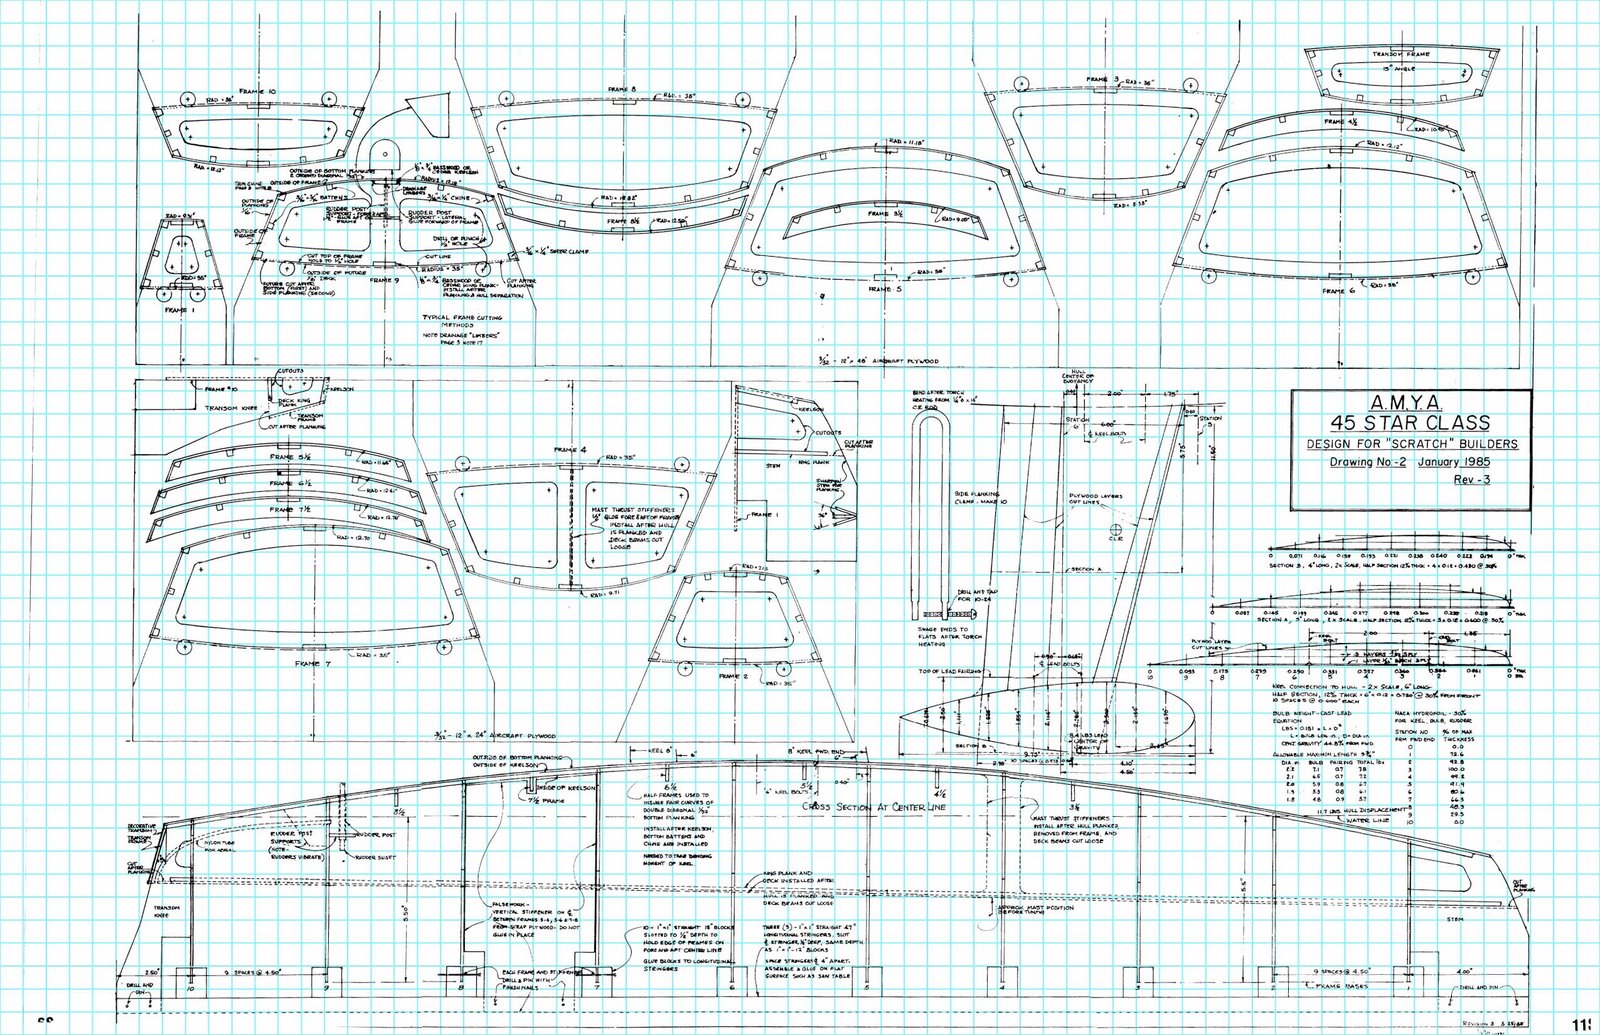 Model Boat Compendium: Line drawing and templates {Plans 